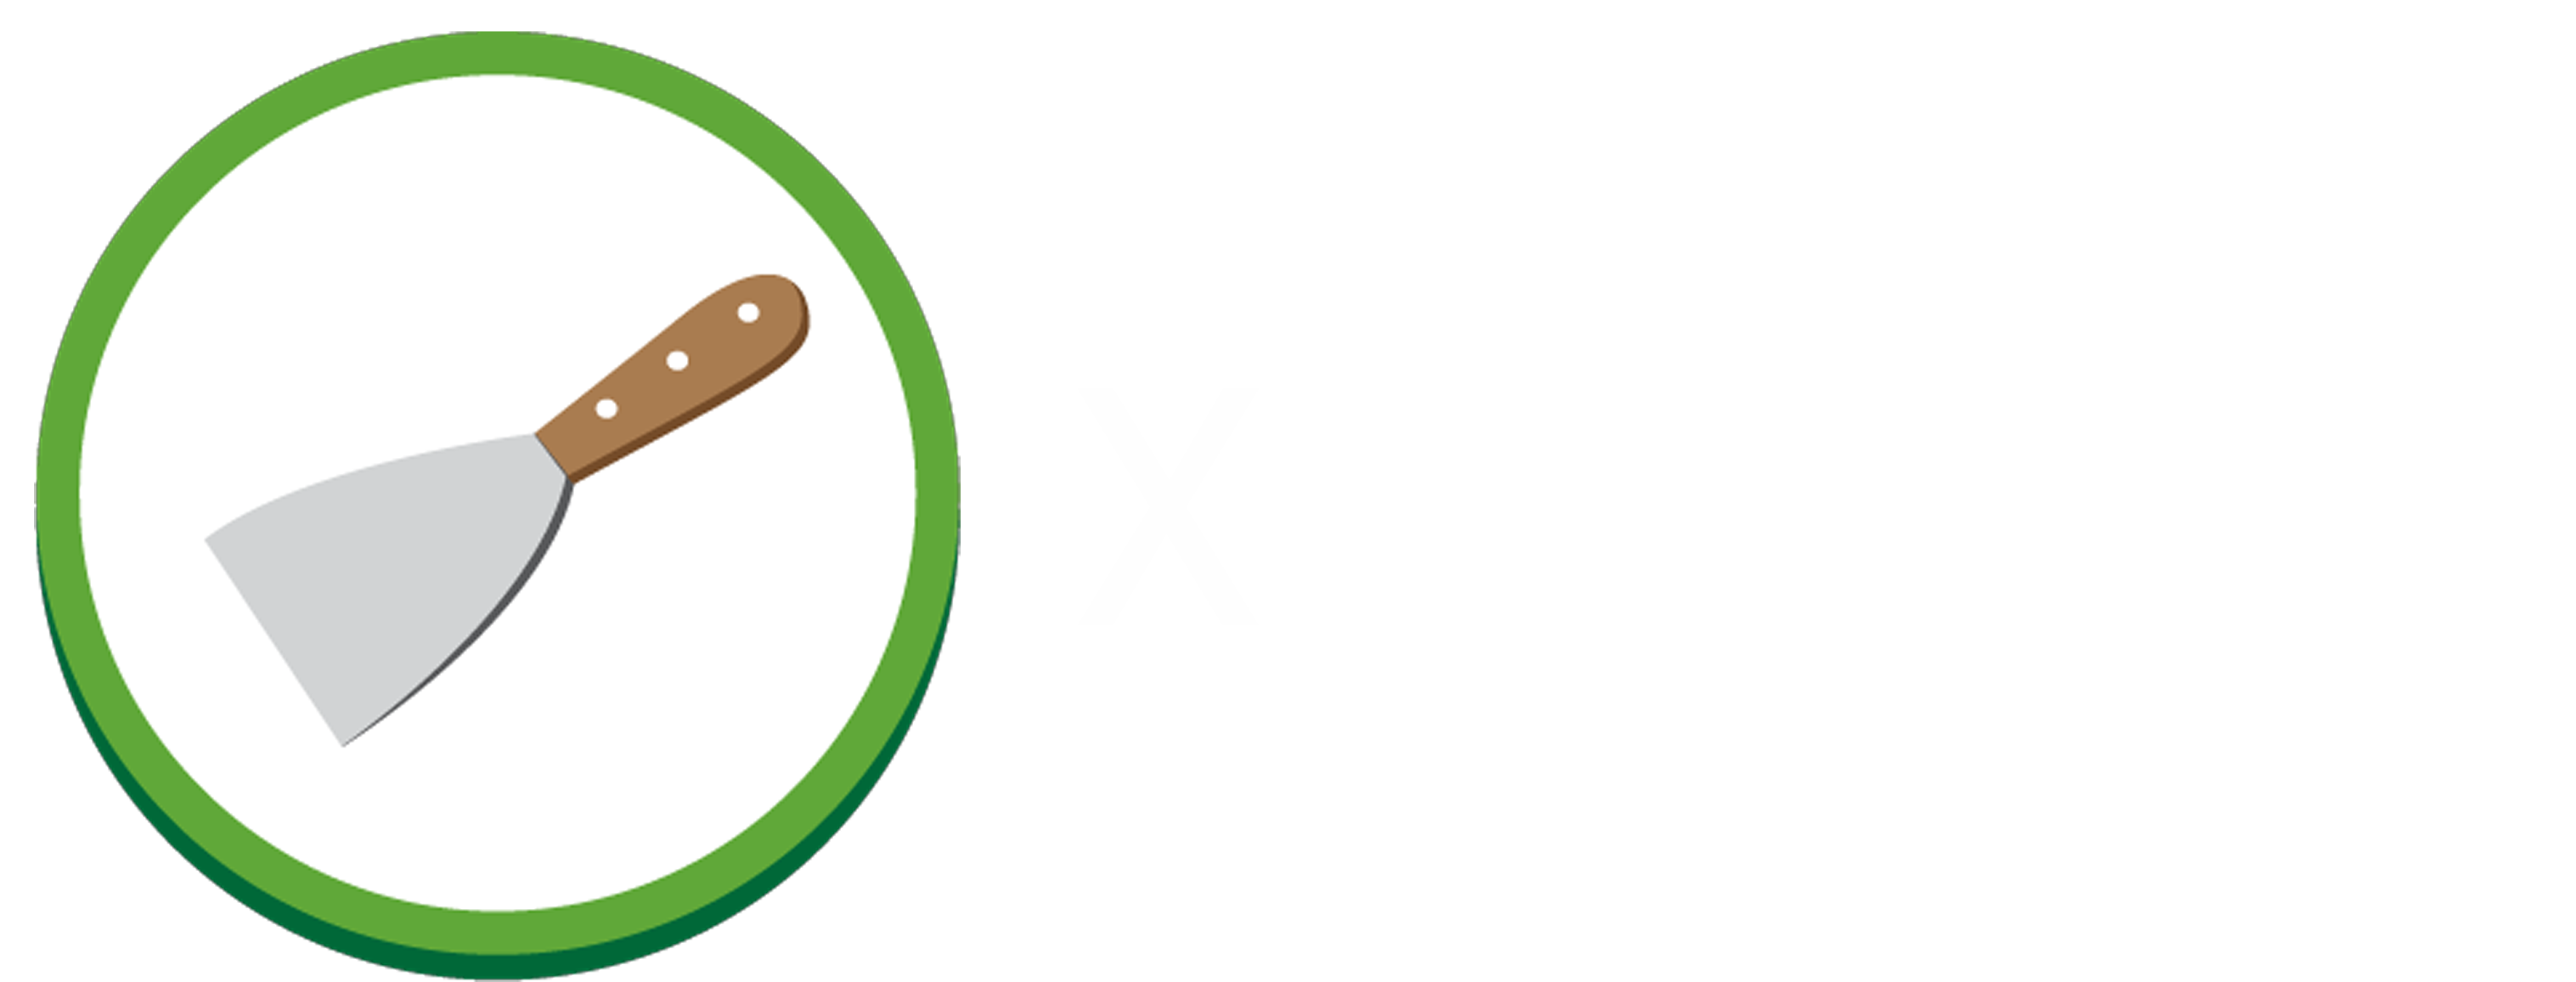 freeCodeCamp Scrapy Beginners Course Logo